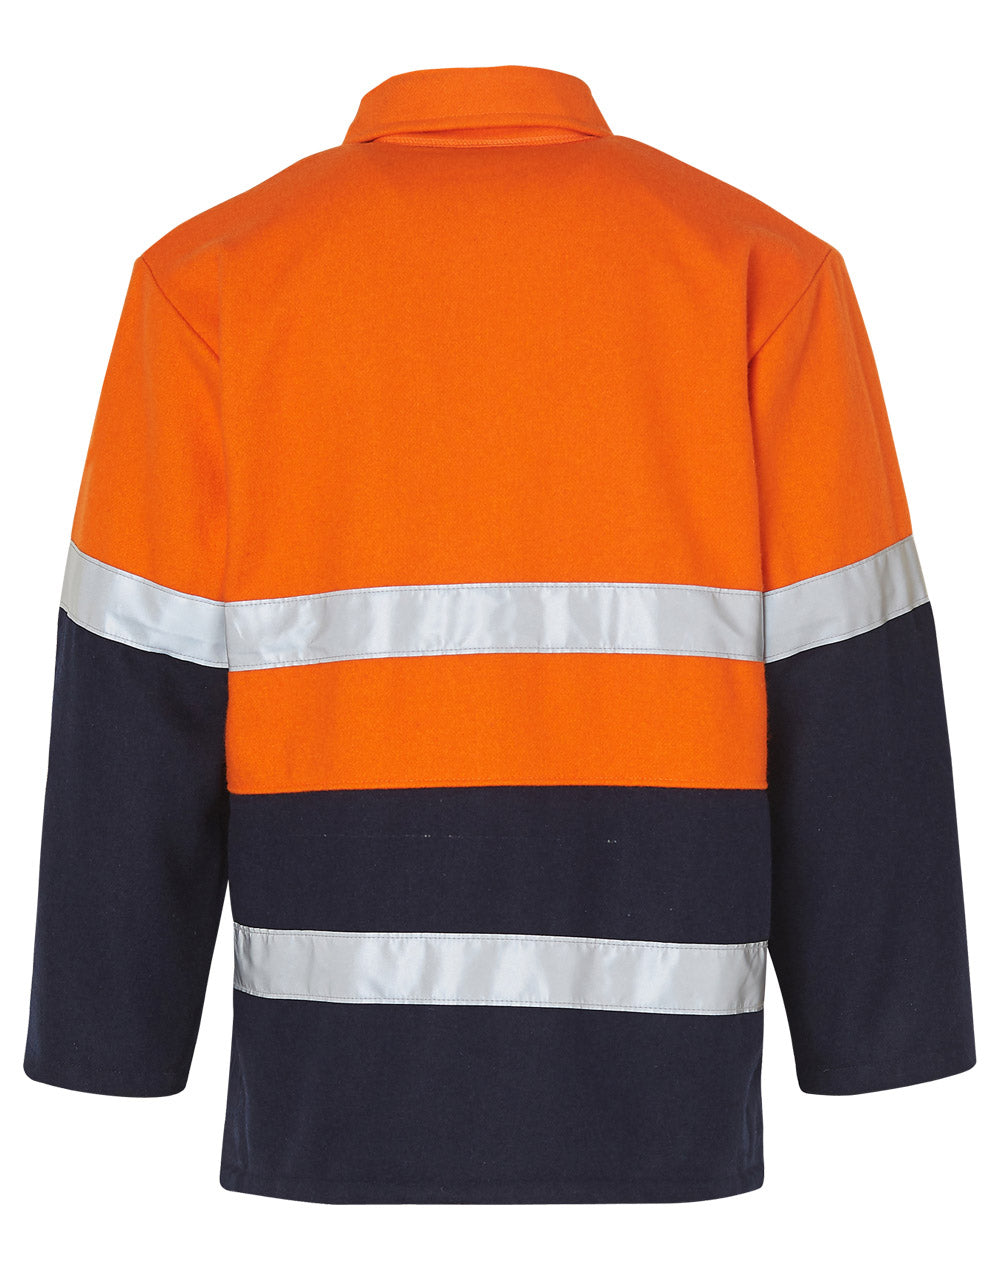 Winning Spirit -Hi-Vis Two Tone Bluey Safety Jacket With 3M Tapes-SW31A